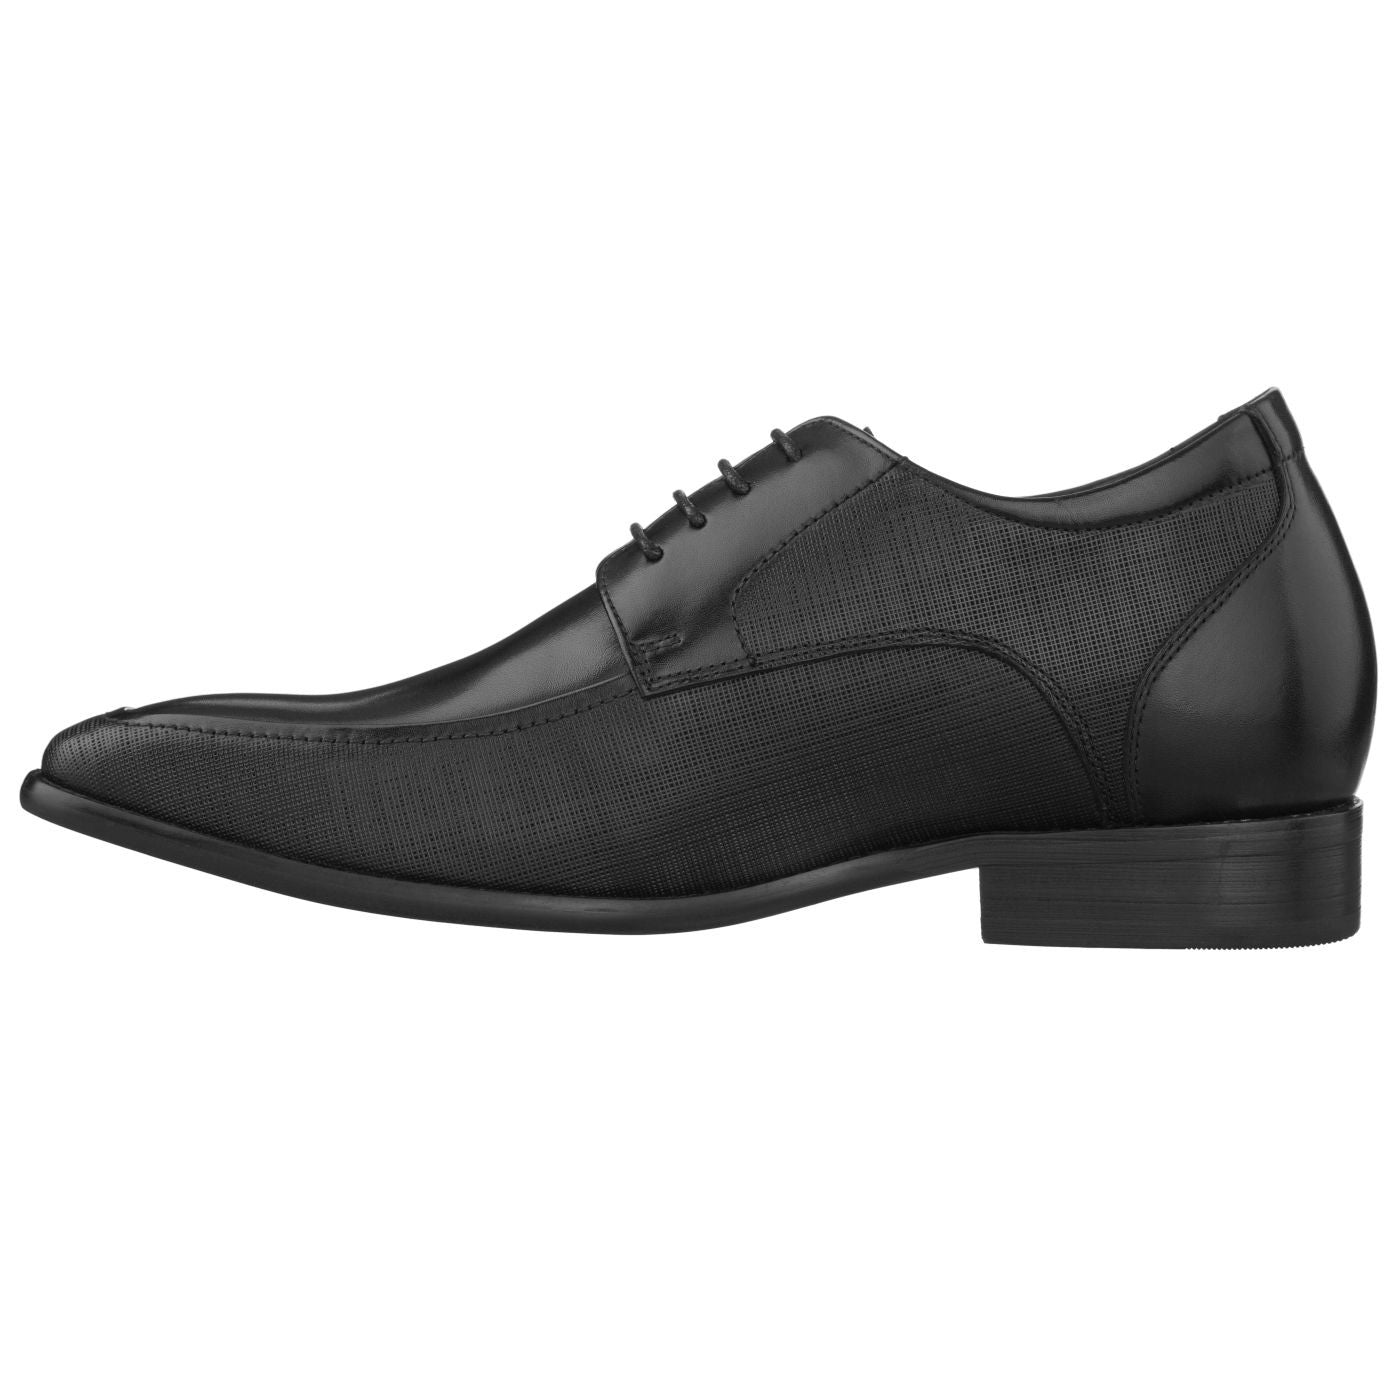 Elevator shoes height increase CALTO - Y5032 - 3.0 Inches Taller (Black)